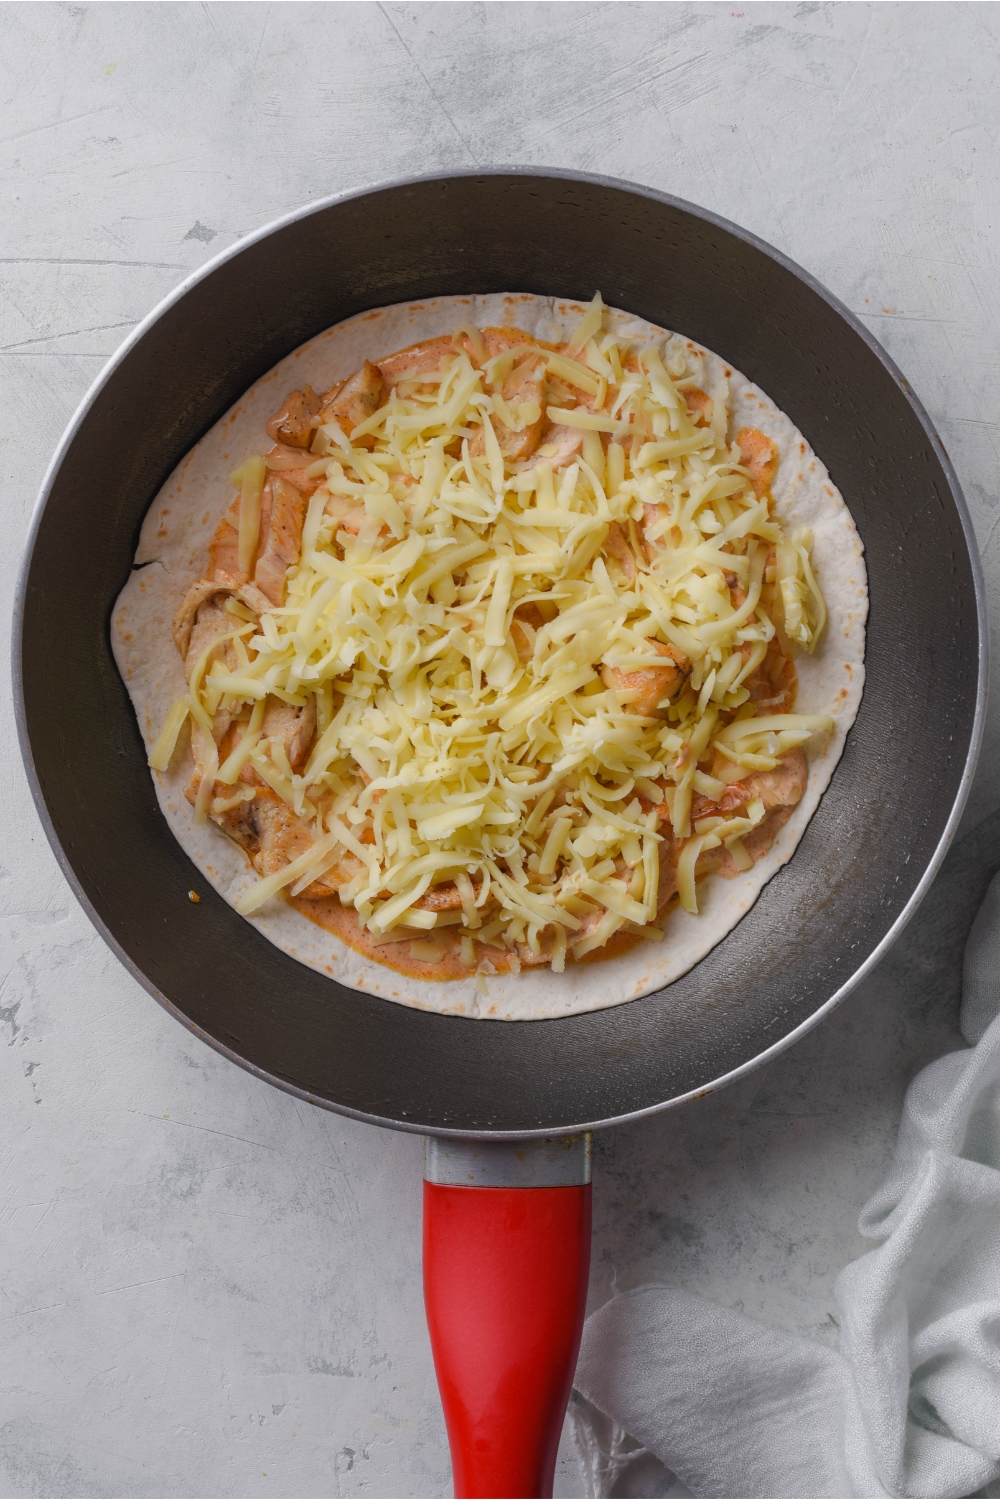 A skillet with a flour tortilla piled with chicken, sauce, and shredded cheese on top.